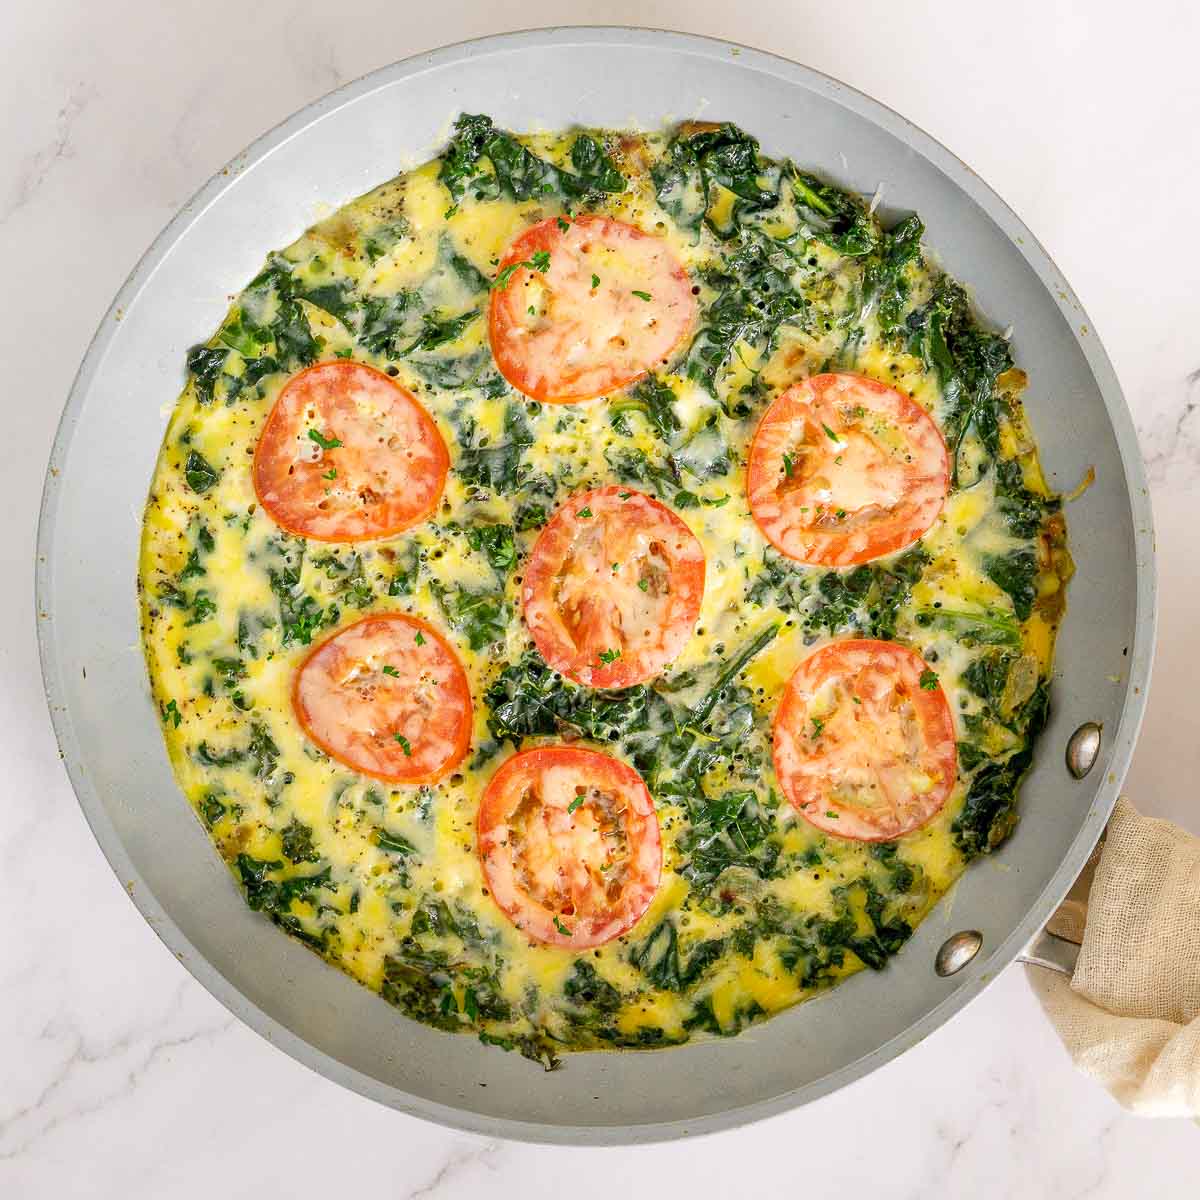 Stovetop frittata in a skillet.